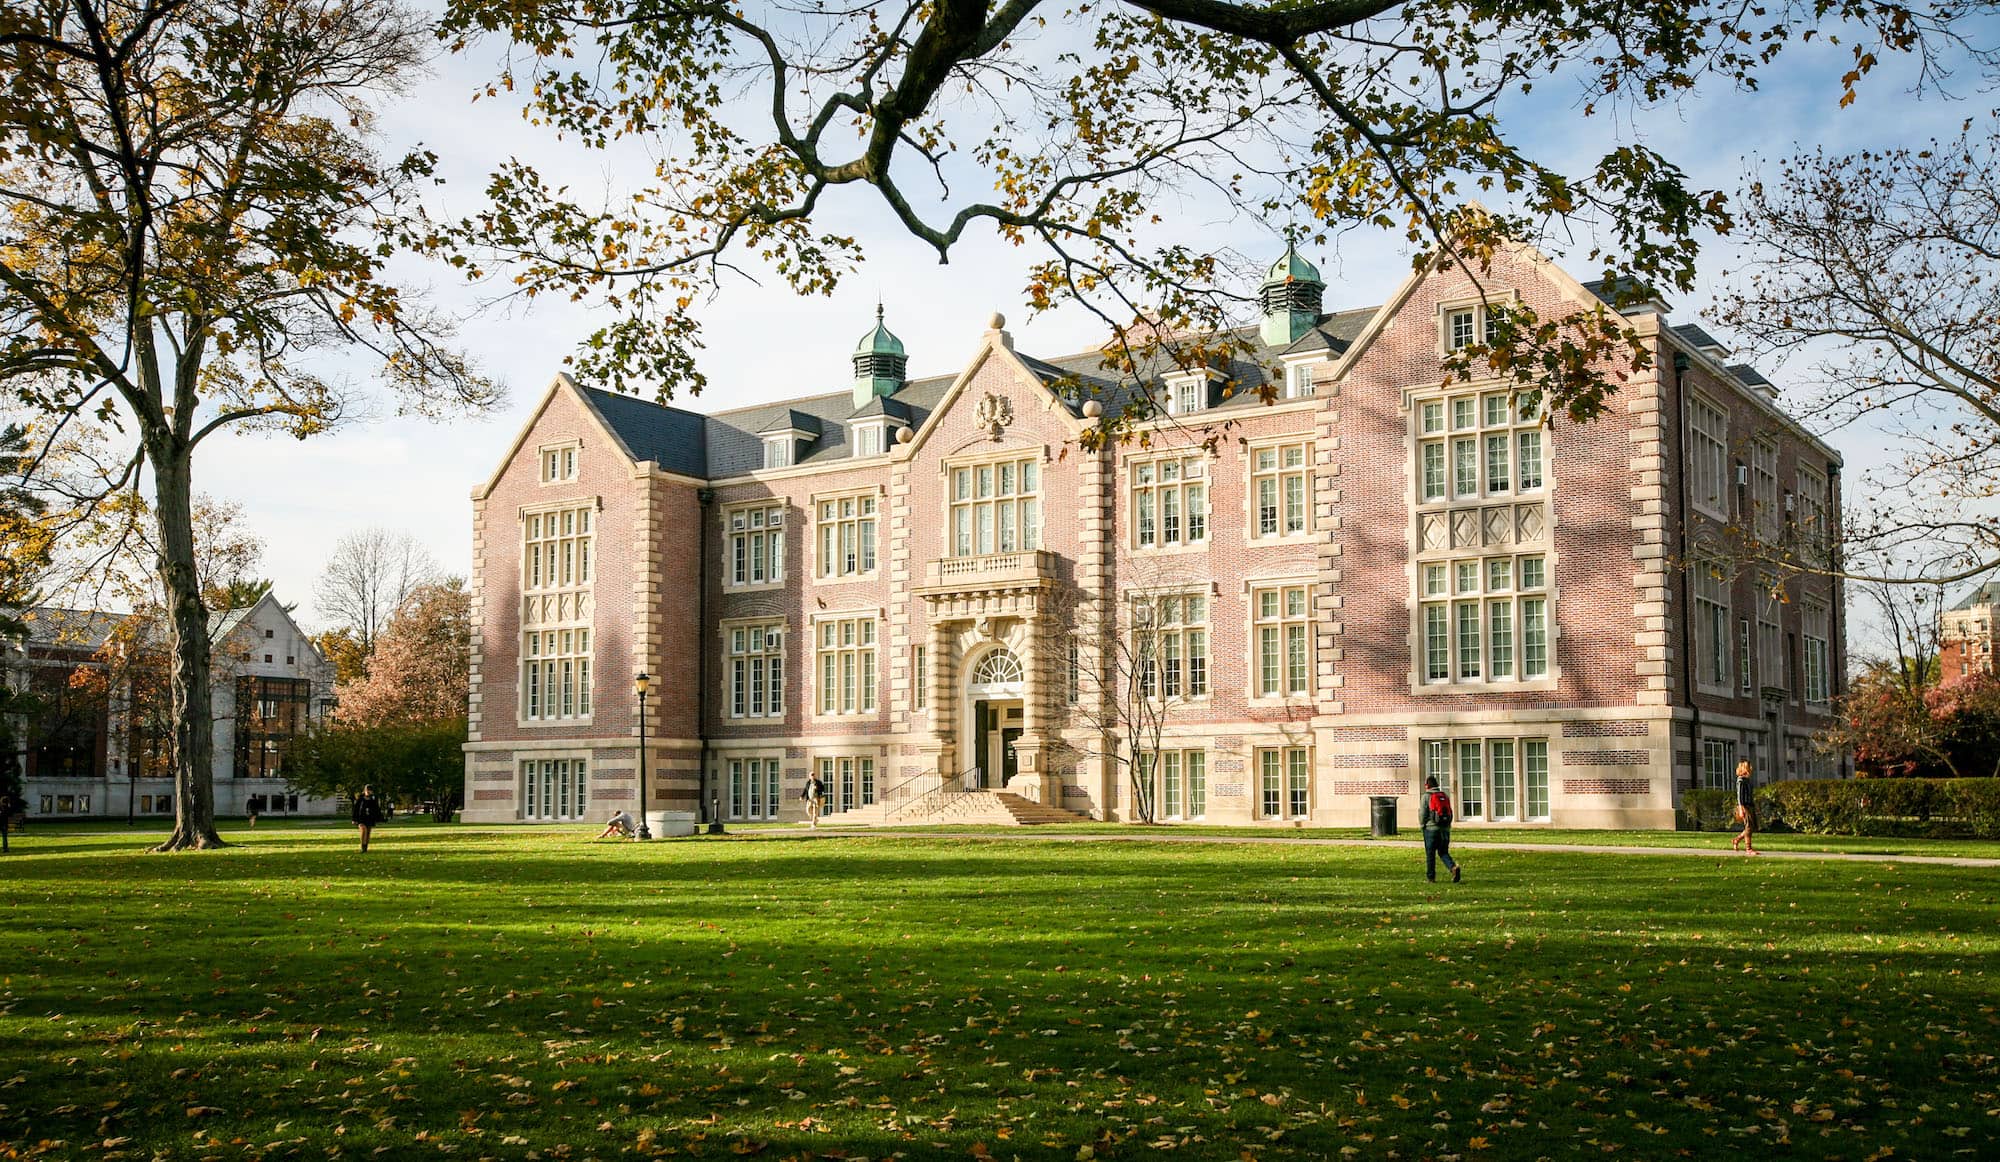 Rockefeller Hall, a large brick building on Vassar’s campus, with several large windows surrounded by various trees on a clear day.